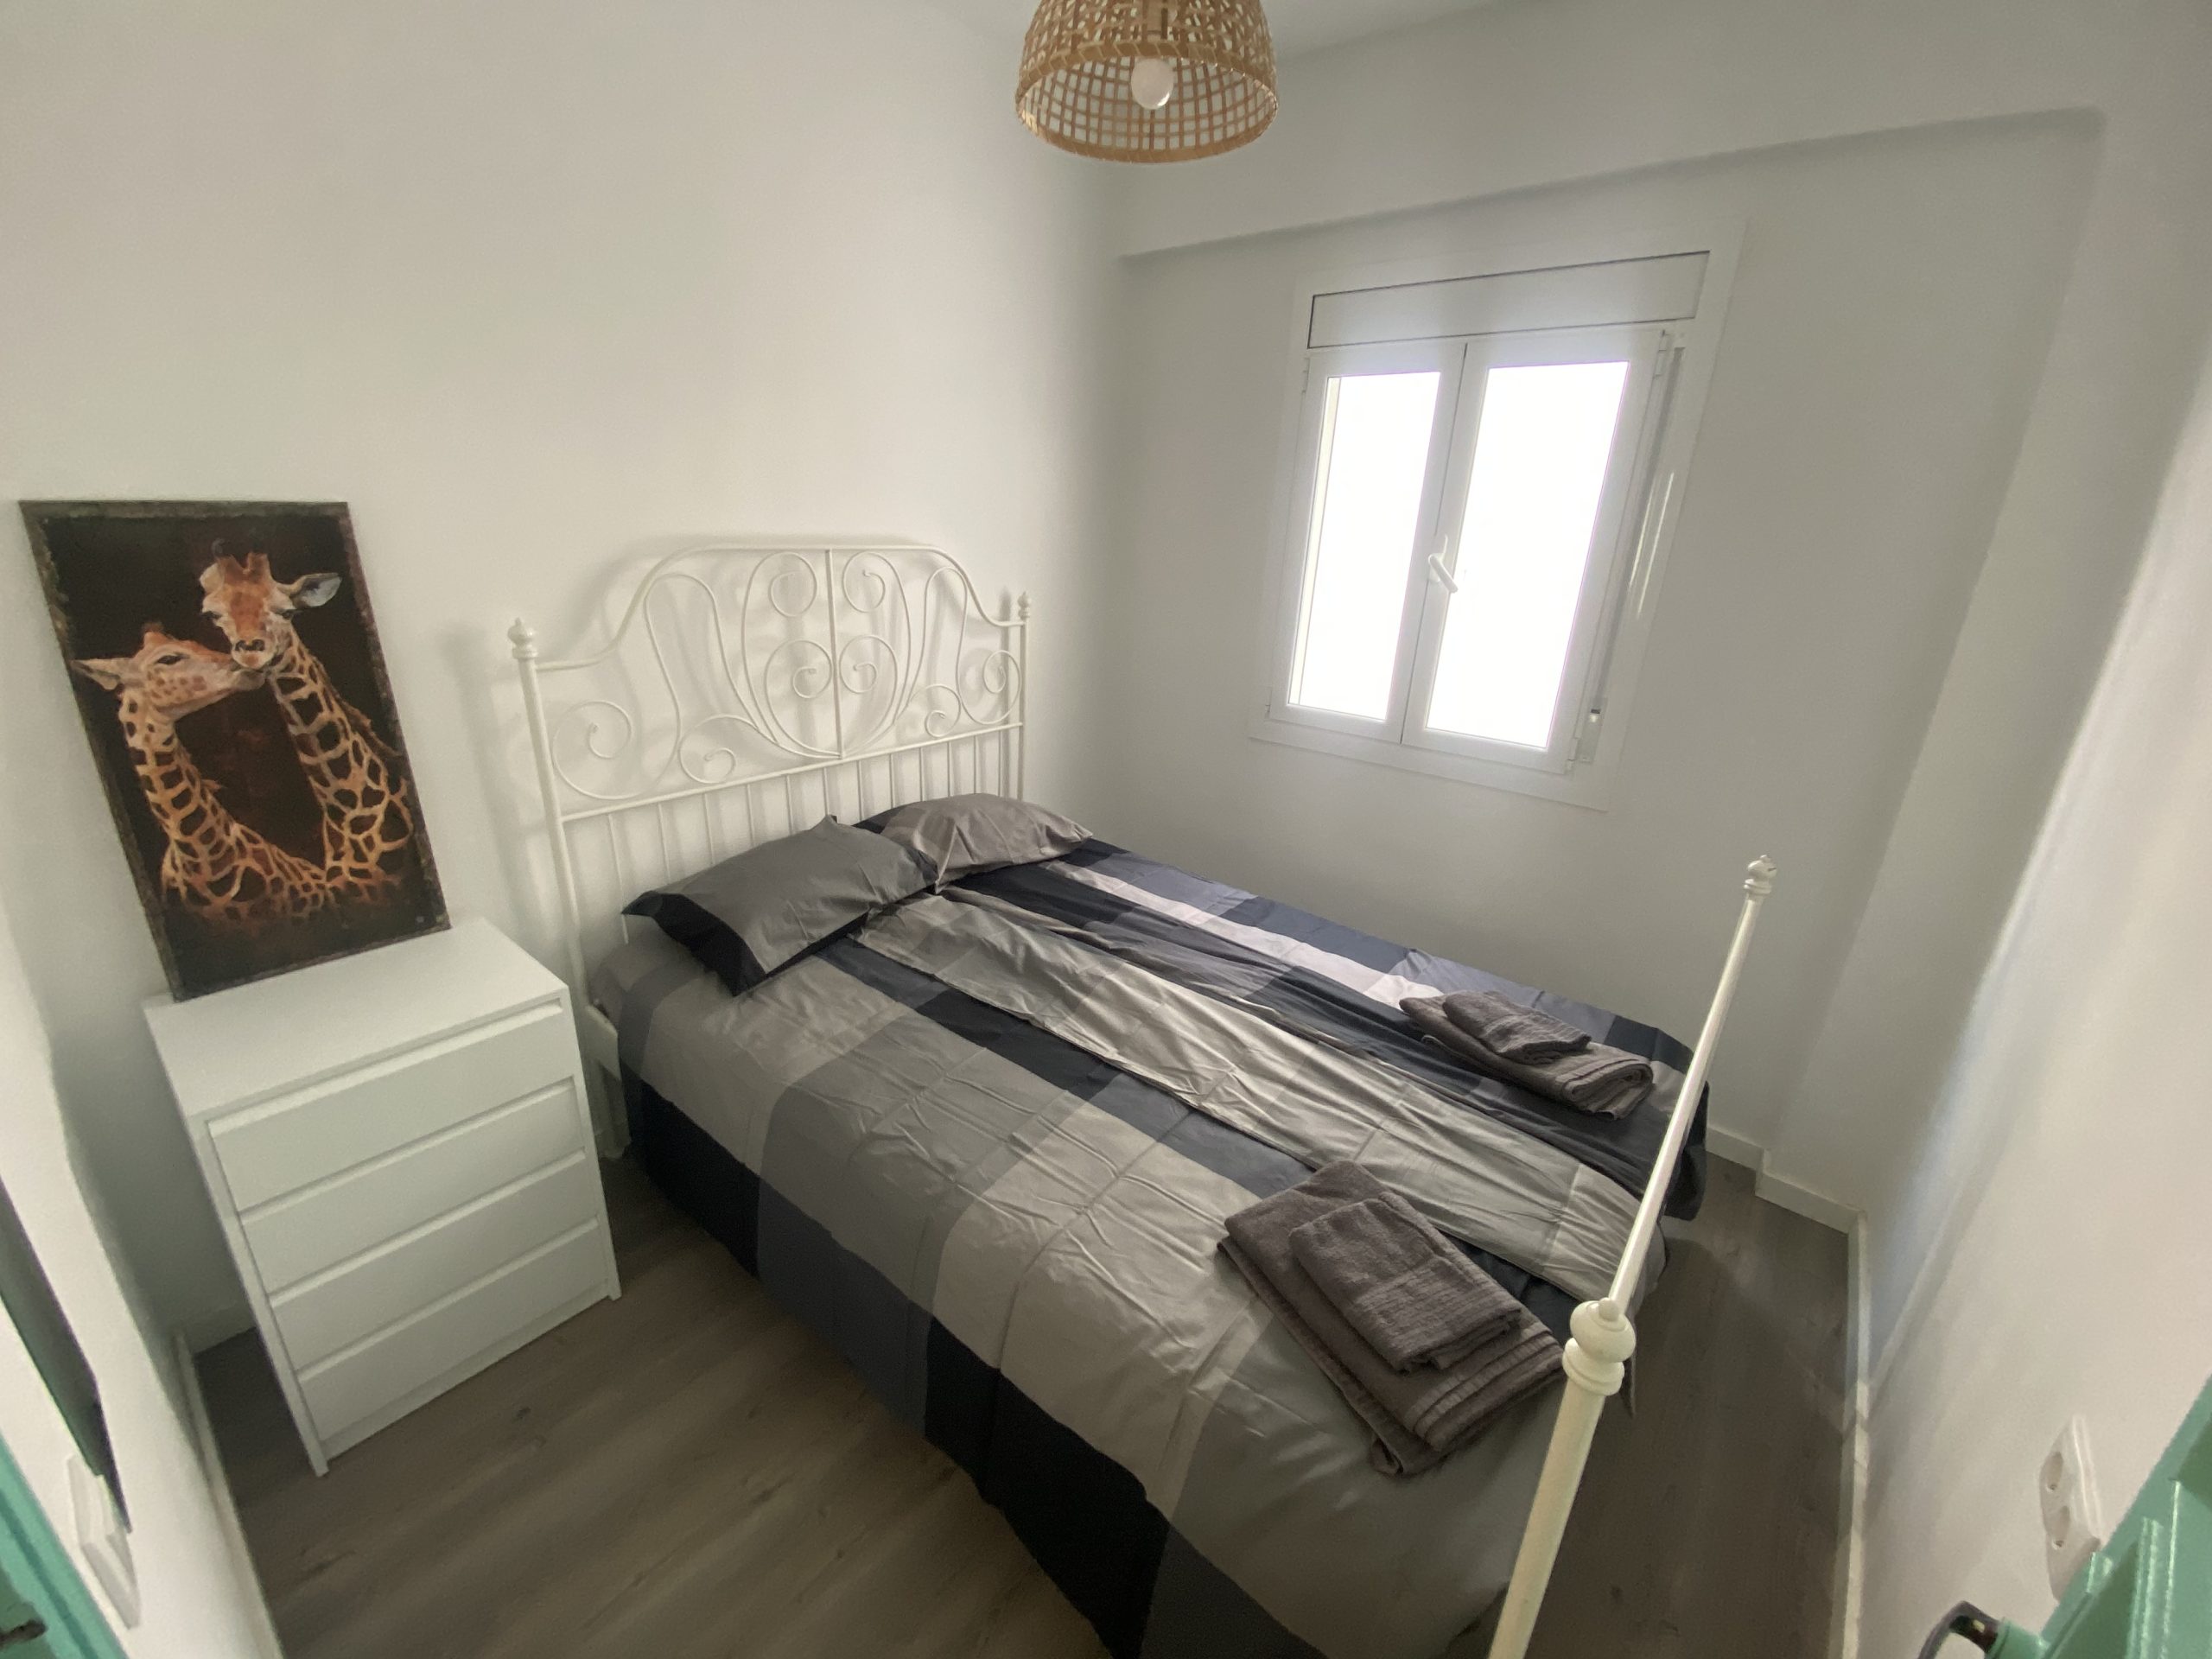 Apartment for rent in Valencia -Bedroom